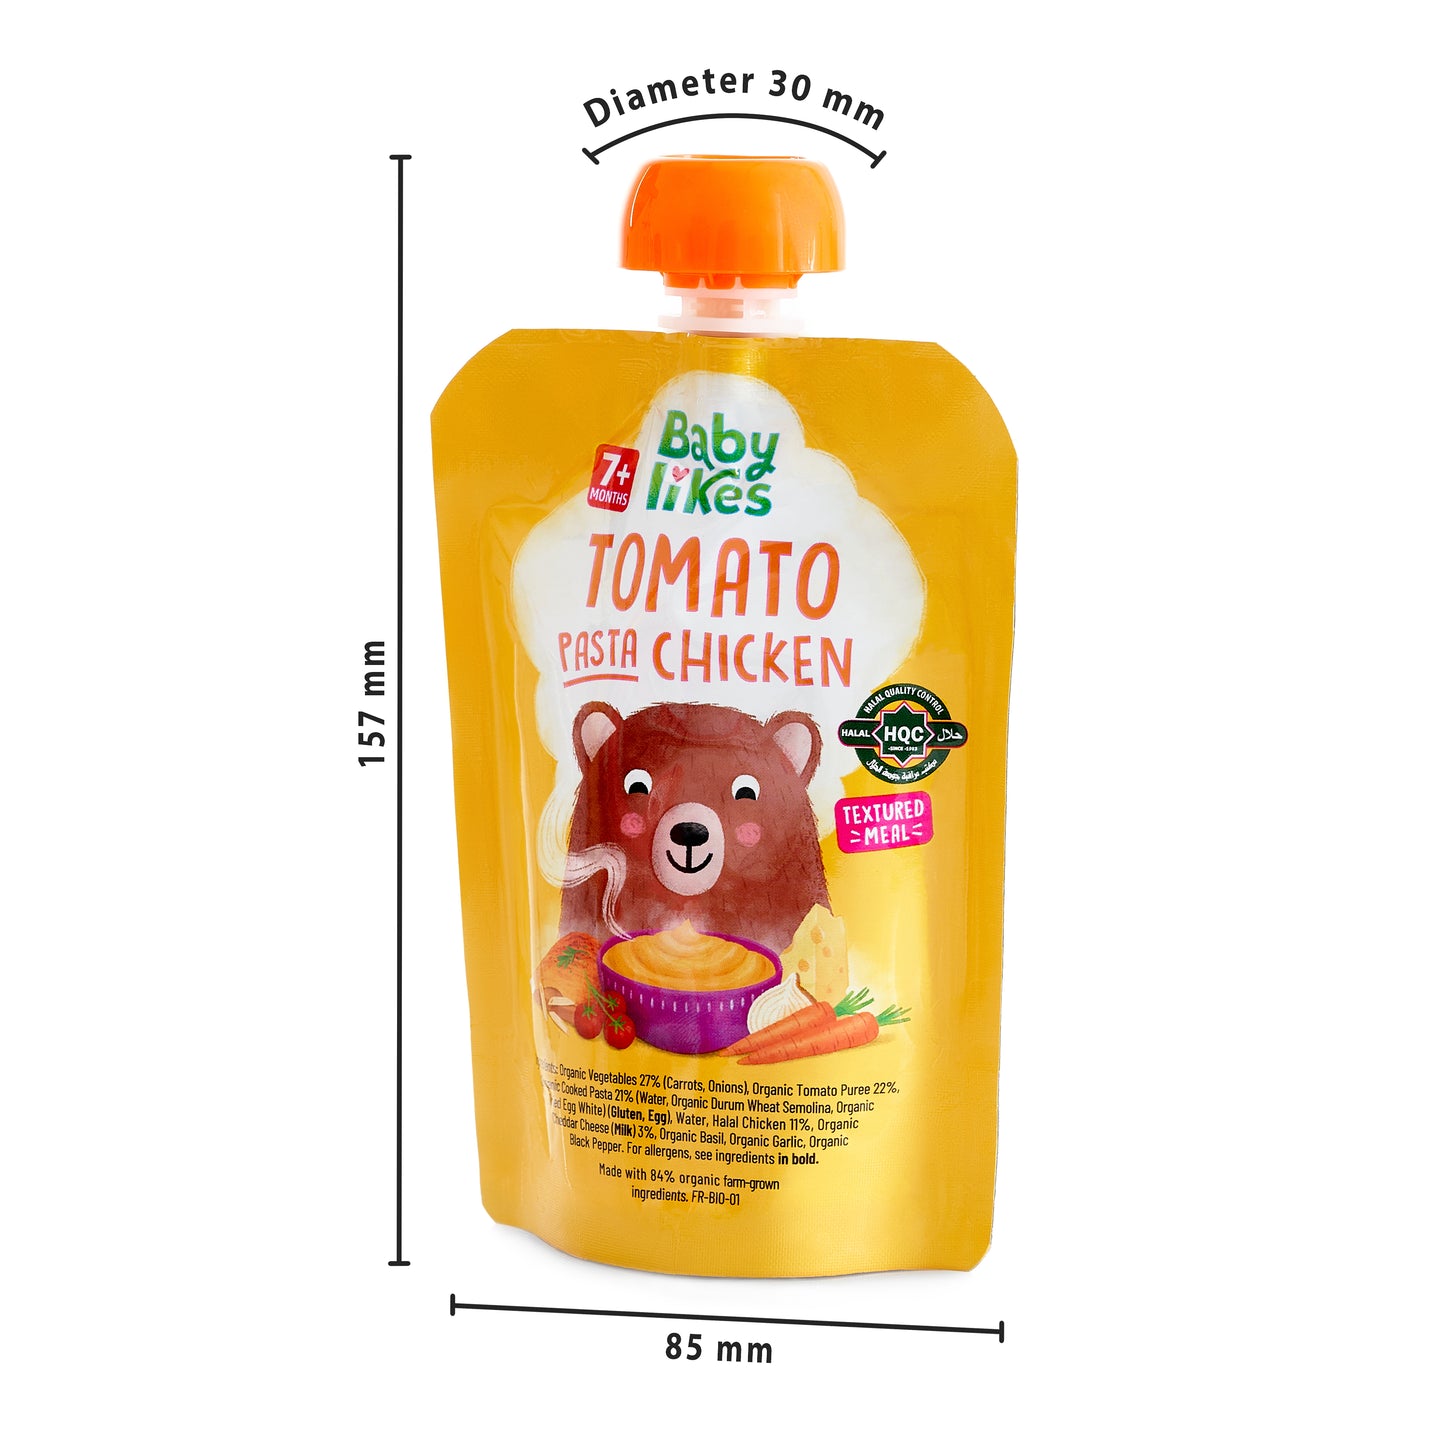 Tomato Pasta Chicken 130 grams - Baby Puree for 7+ months